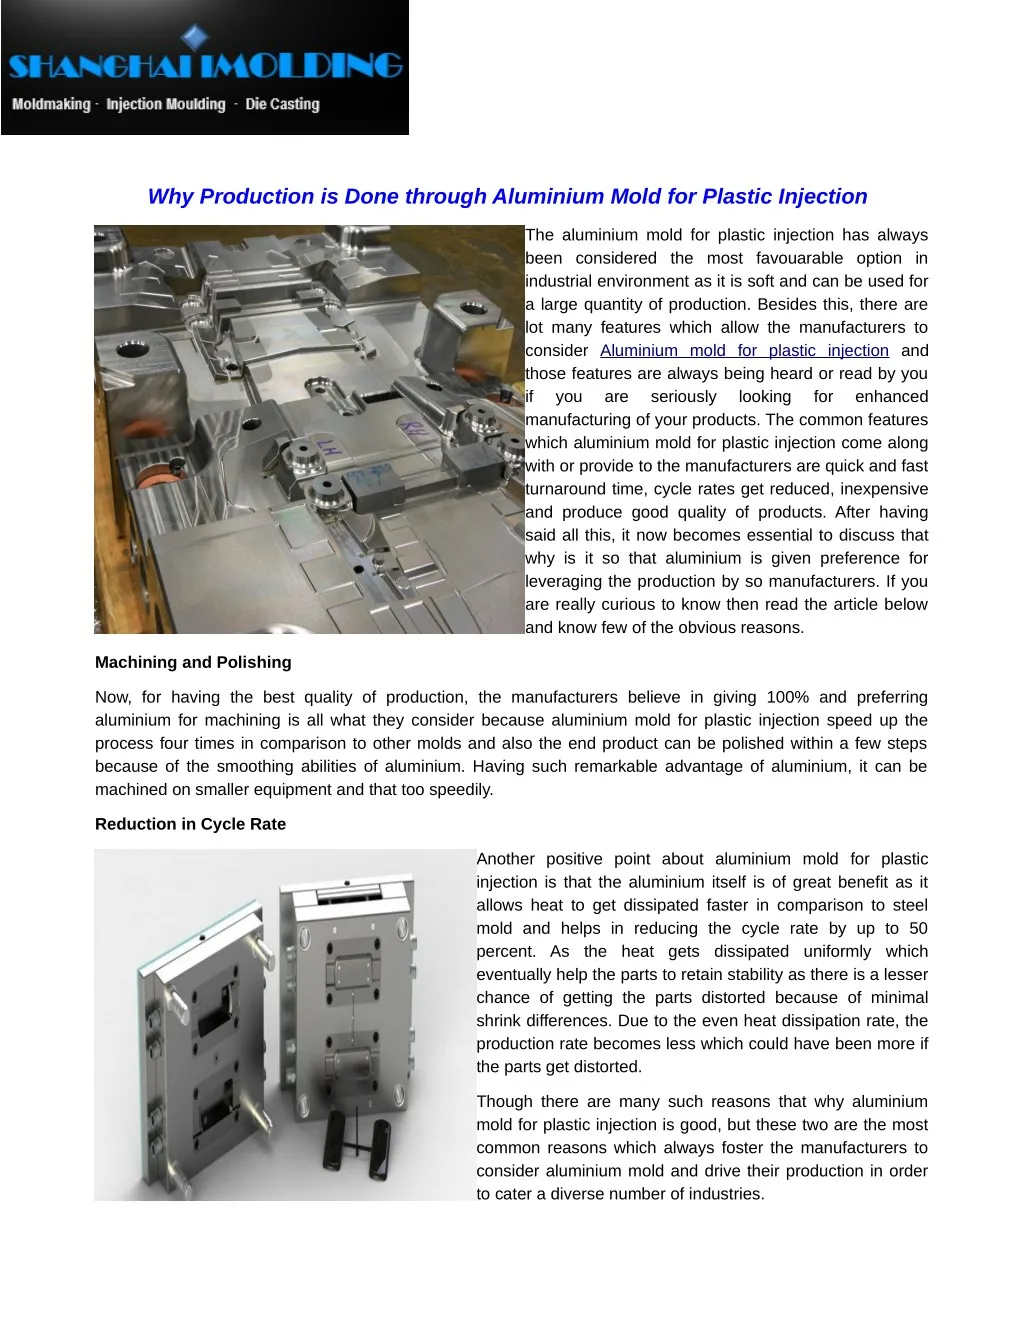 why production is done through aluminium mold